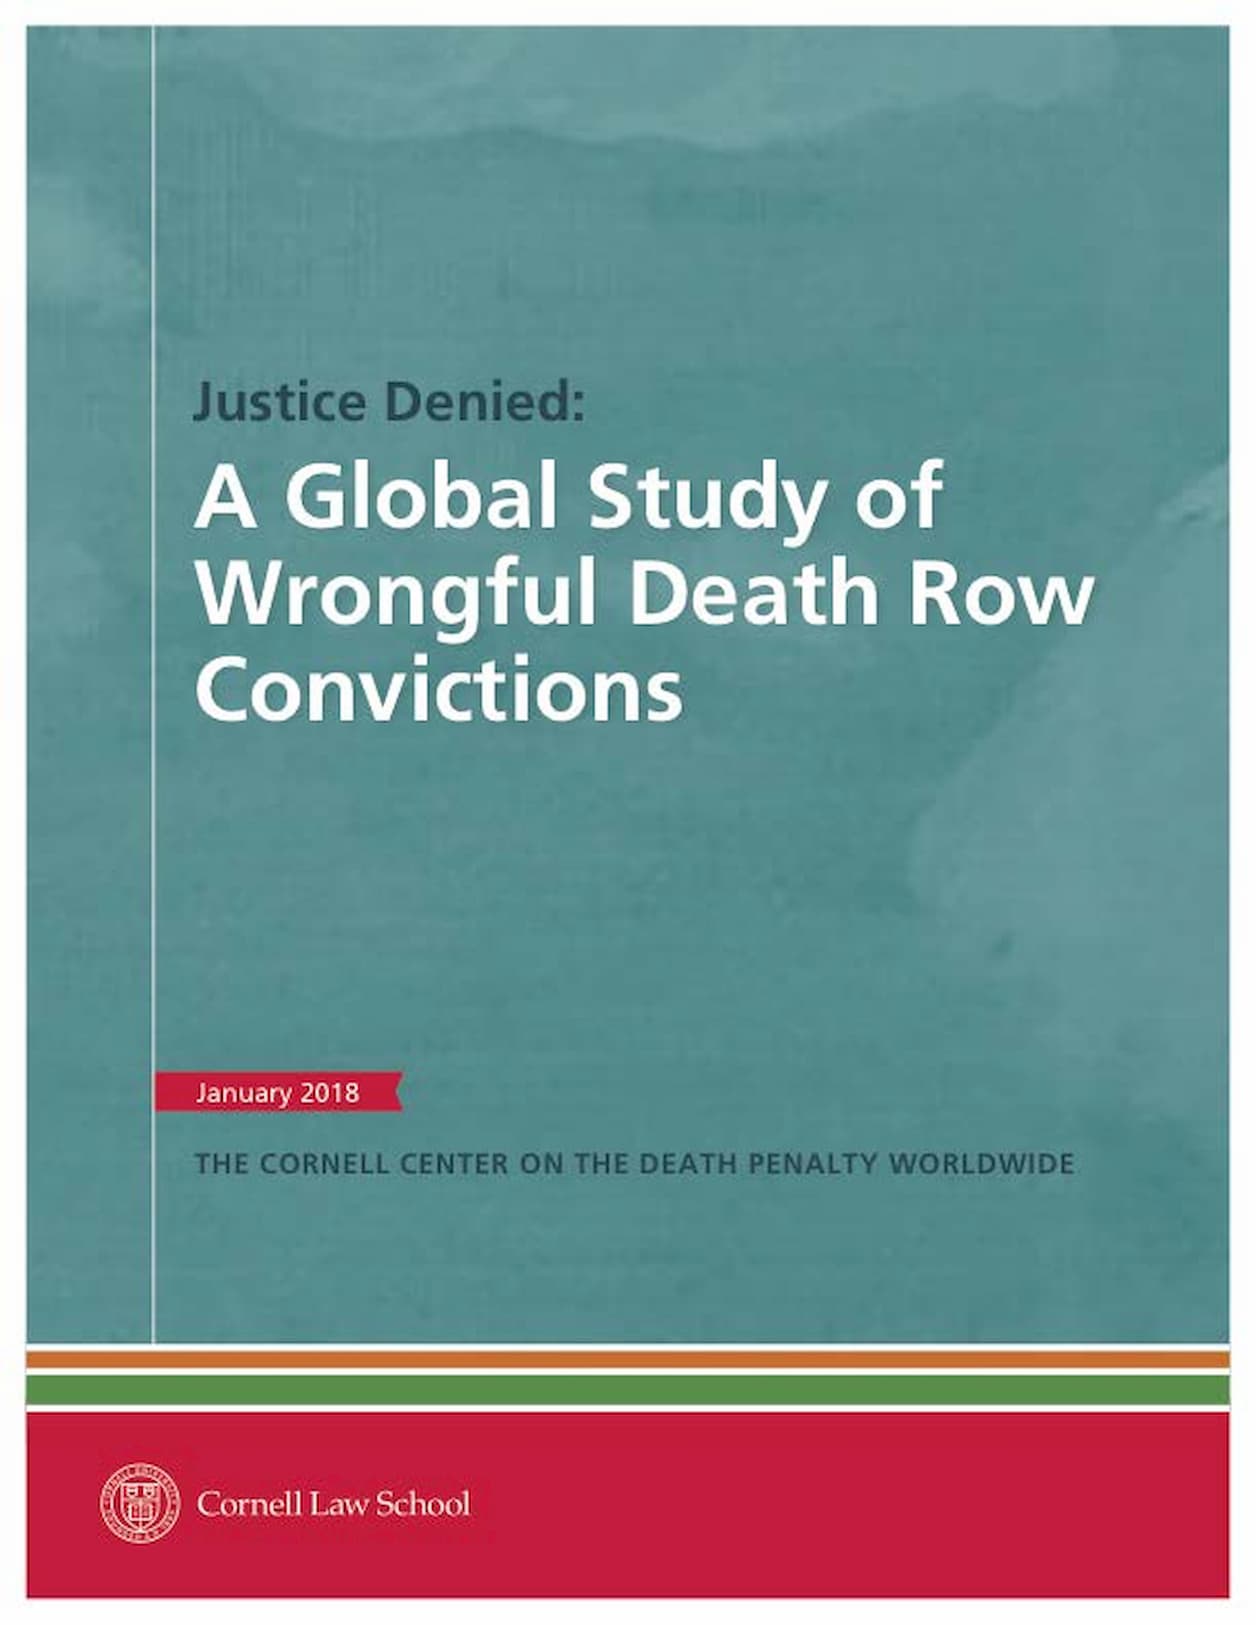 Justice-Denied-A-Global-Study-of-Wrongful-Death-Row-Convictions Cover Page